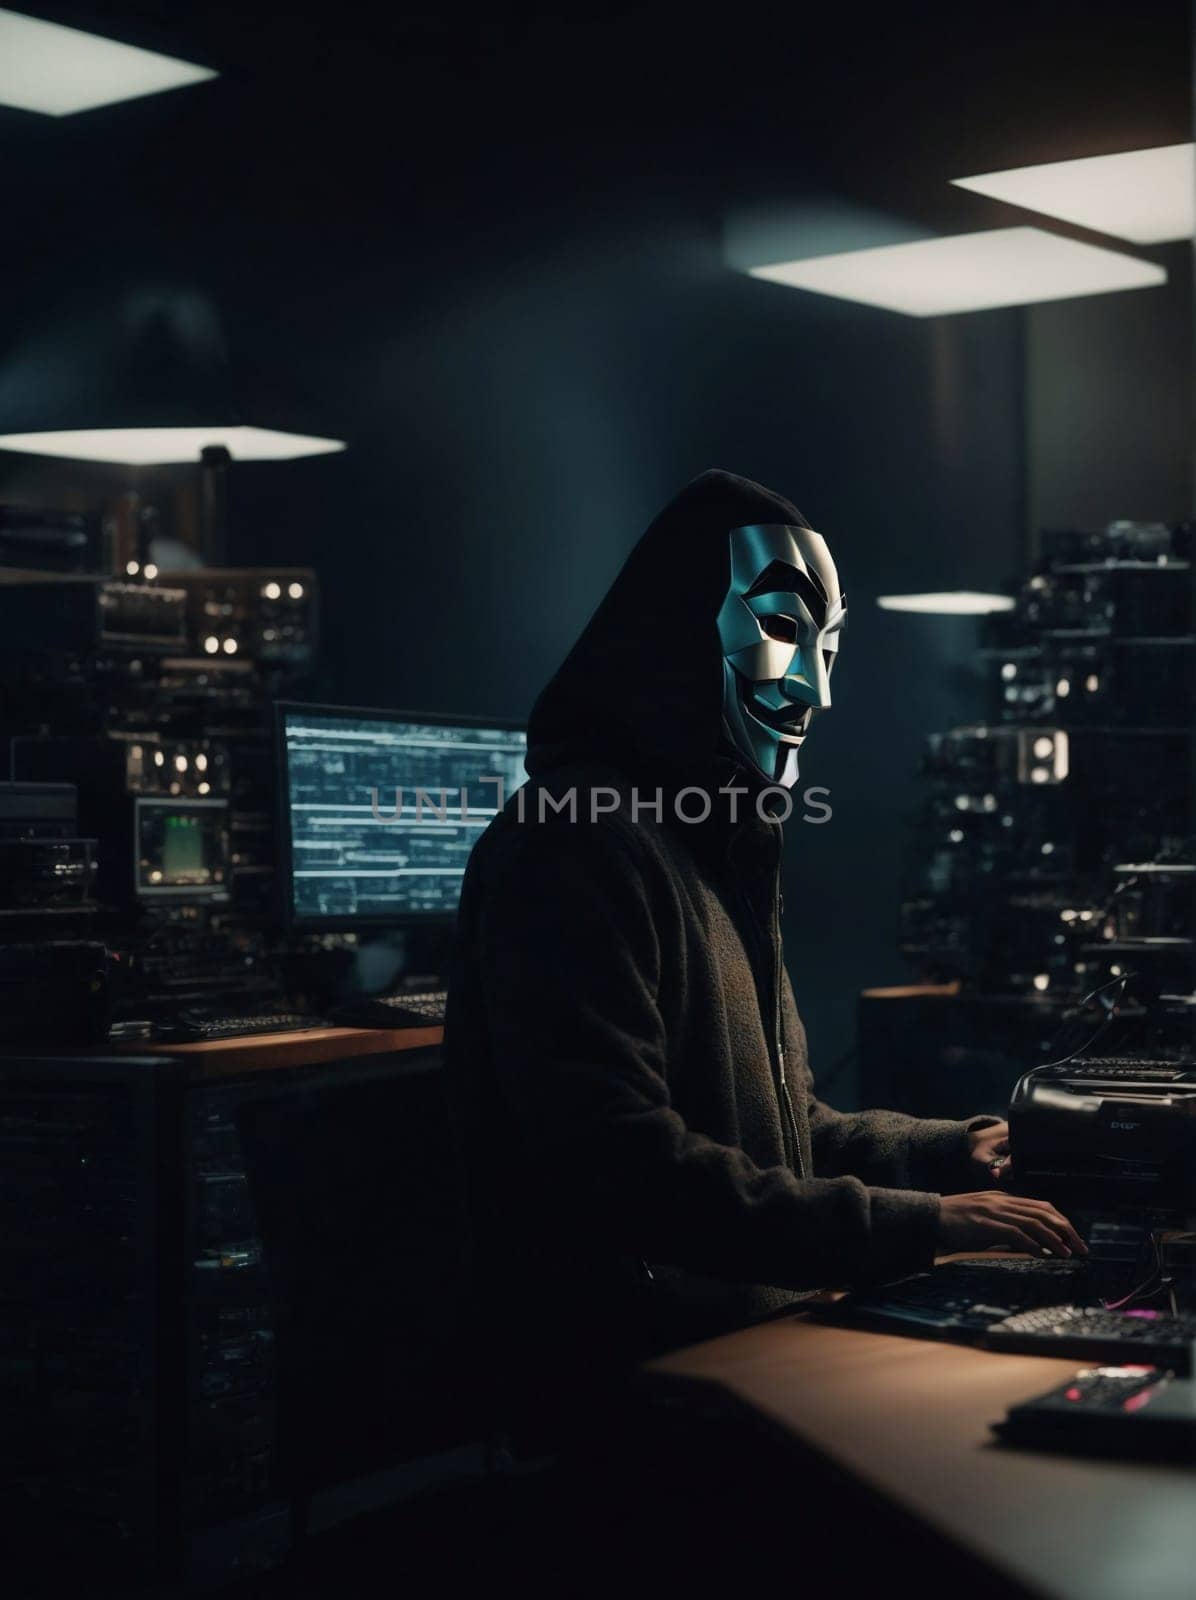 A man wearing a mask sits at a desk in front of a computer.